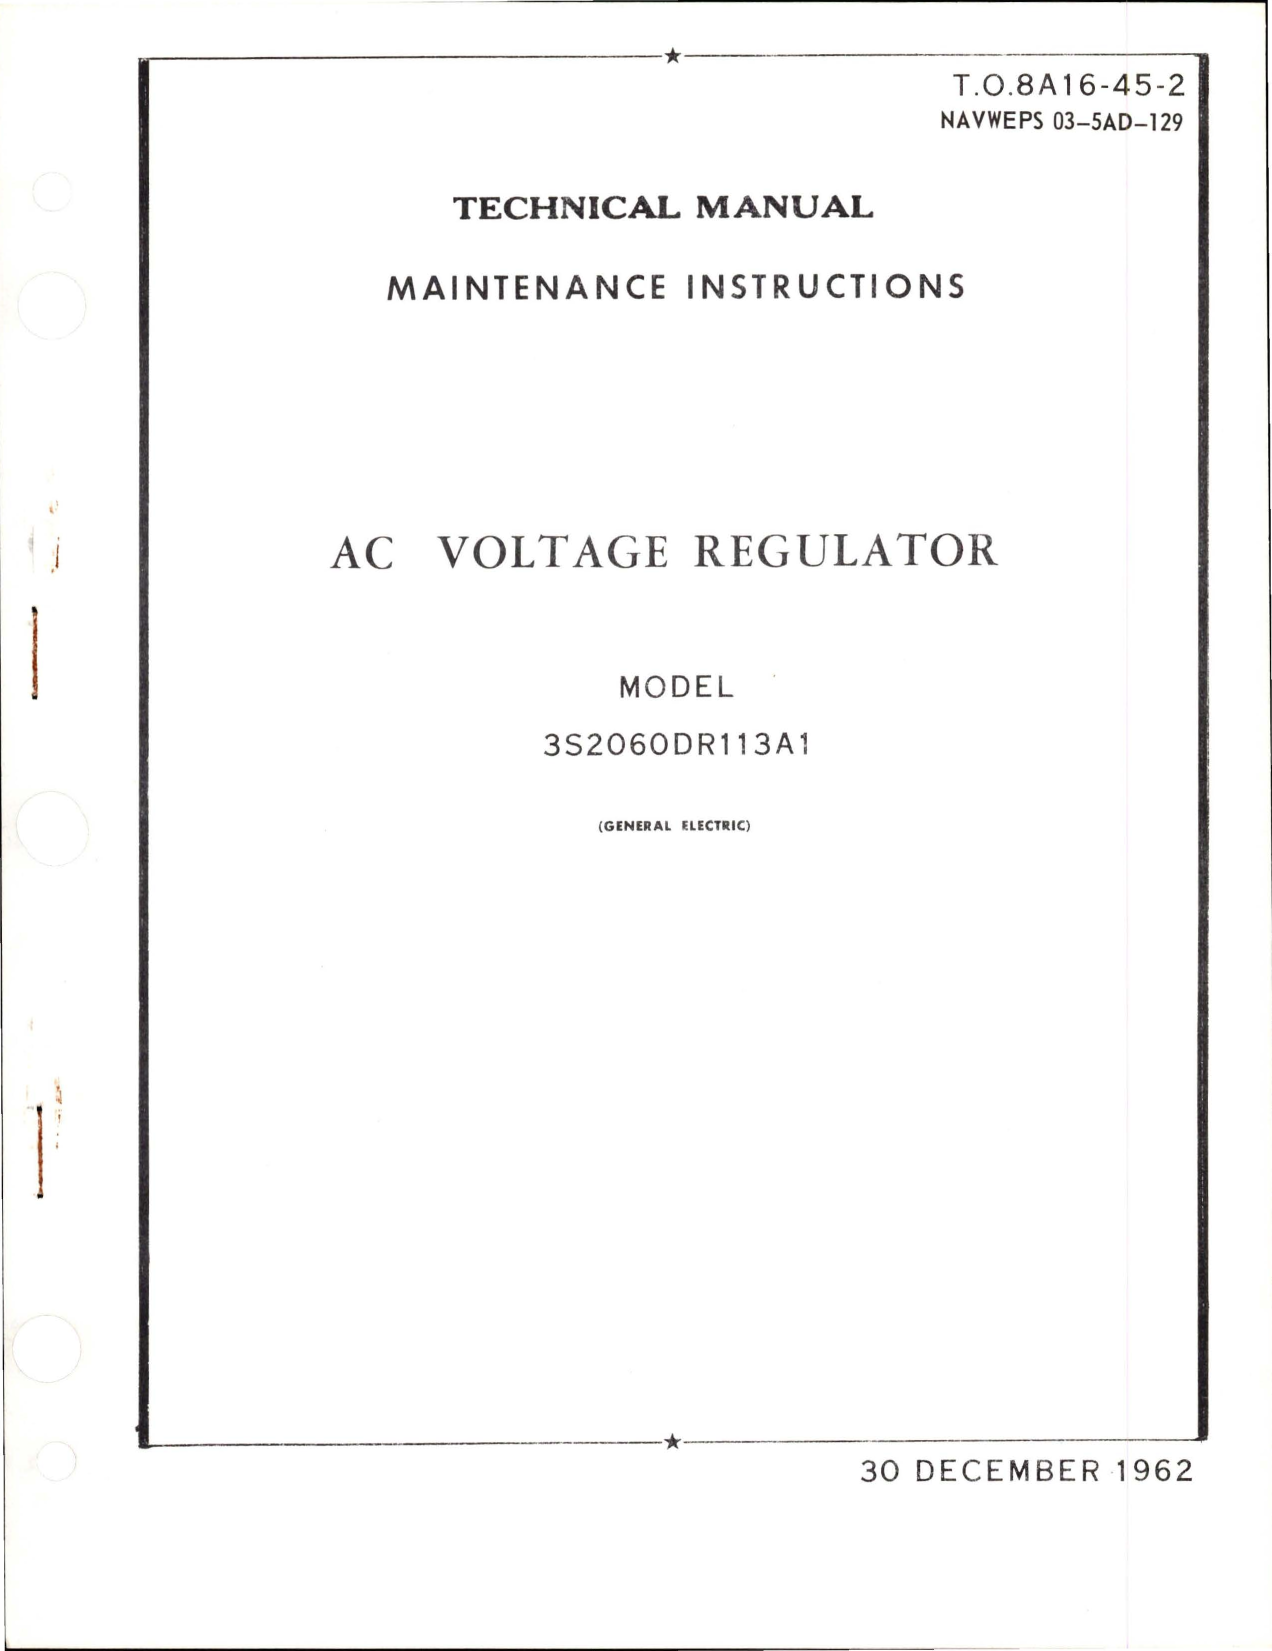 Sample page 1 from AirCorps Library document: Maintenance Instructions for AC Voltage Regulator - Model 3S2060DR113A1